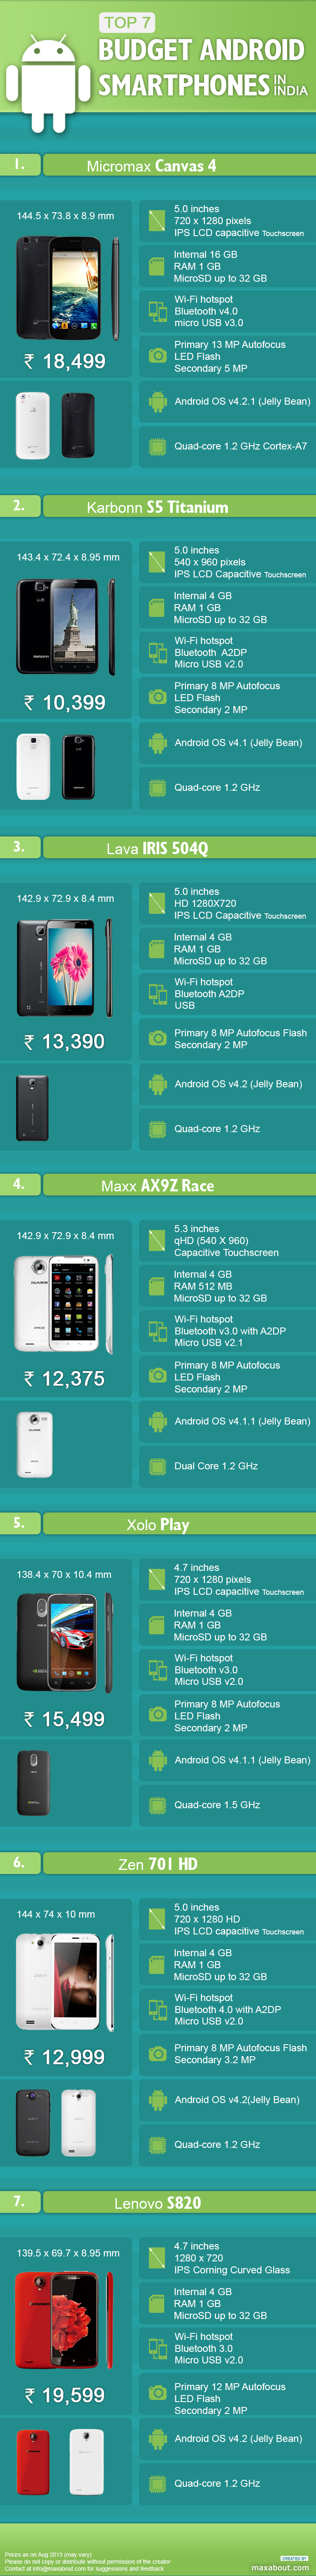 Top 7 Budget Android Smartphones in India